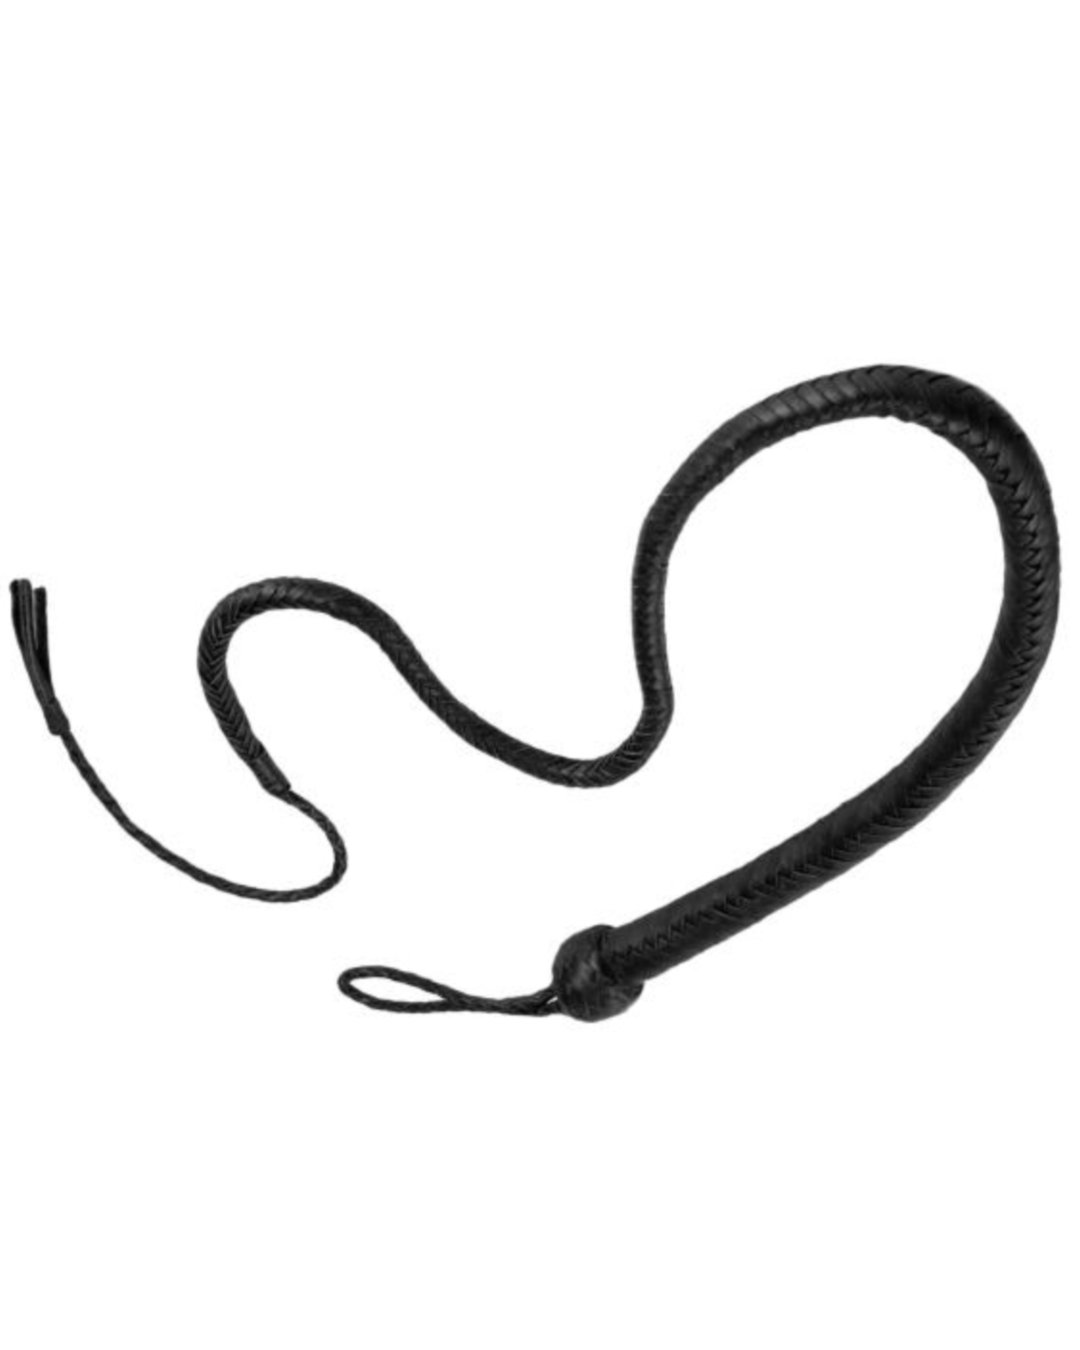 Strict Leather 4 Foot Whip  full length 